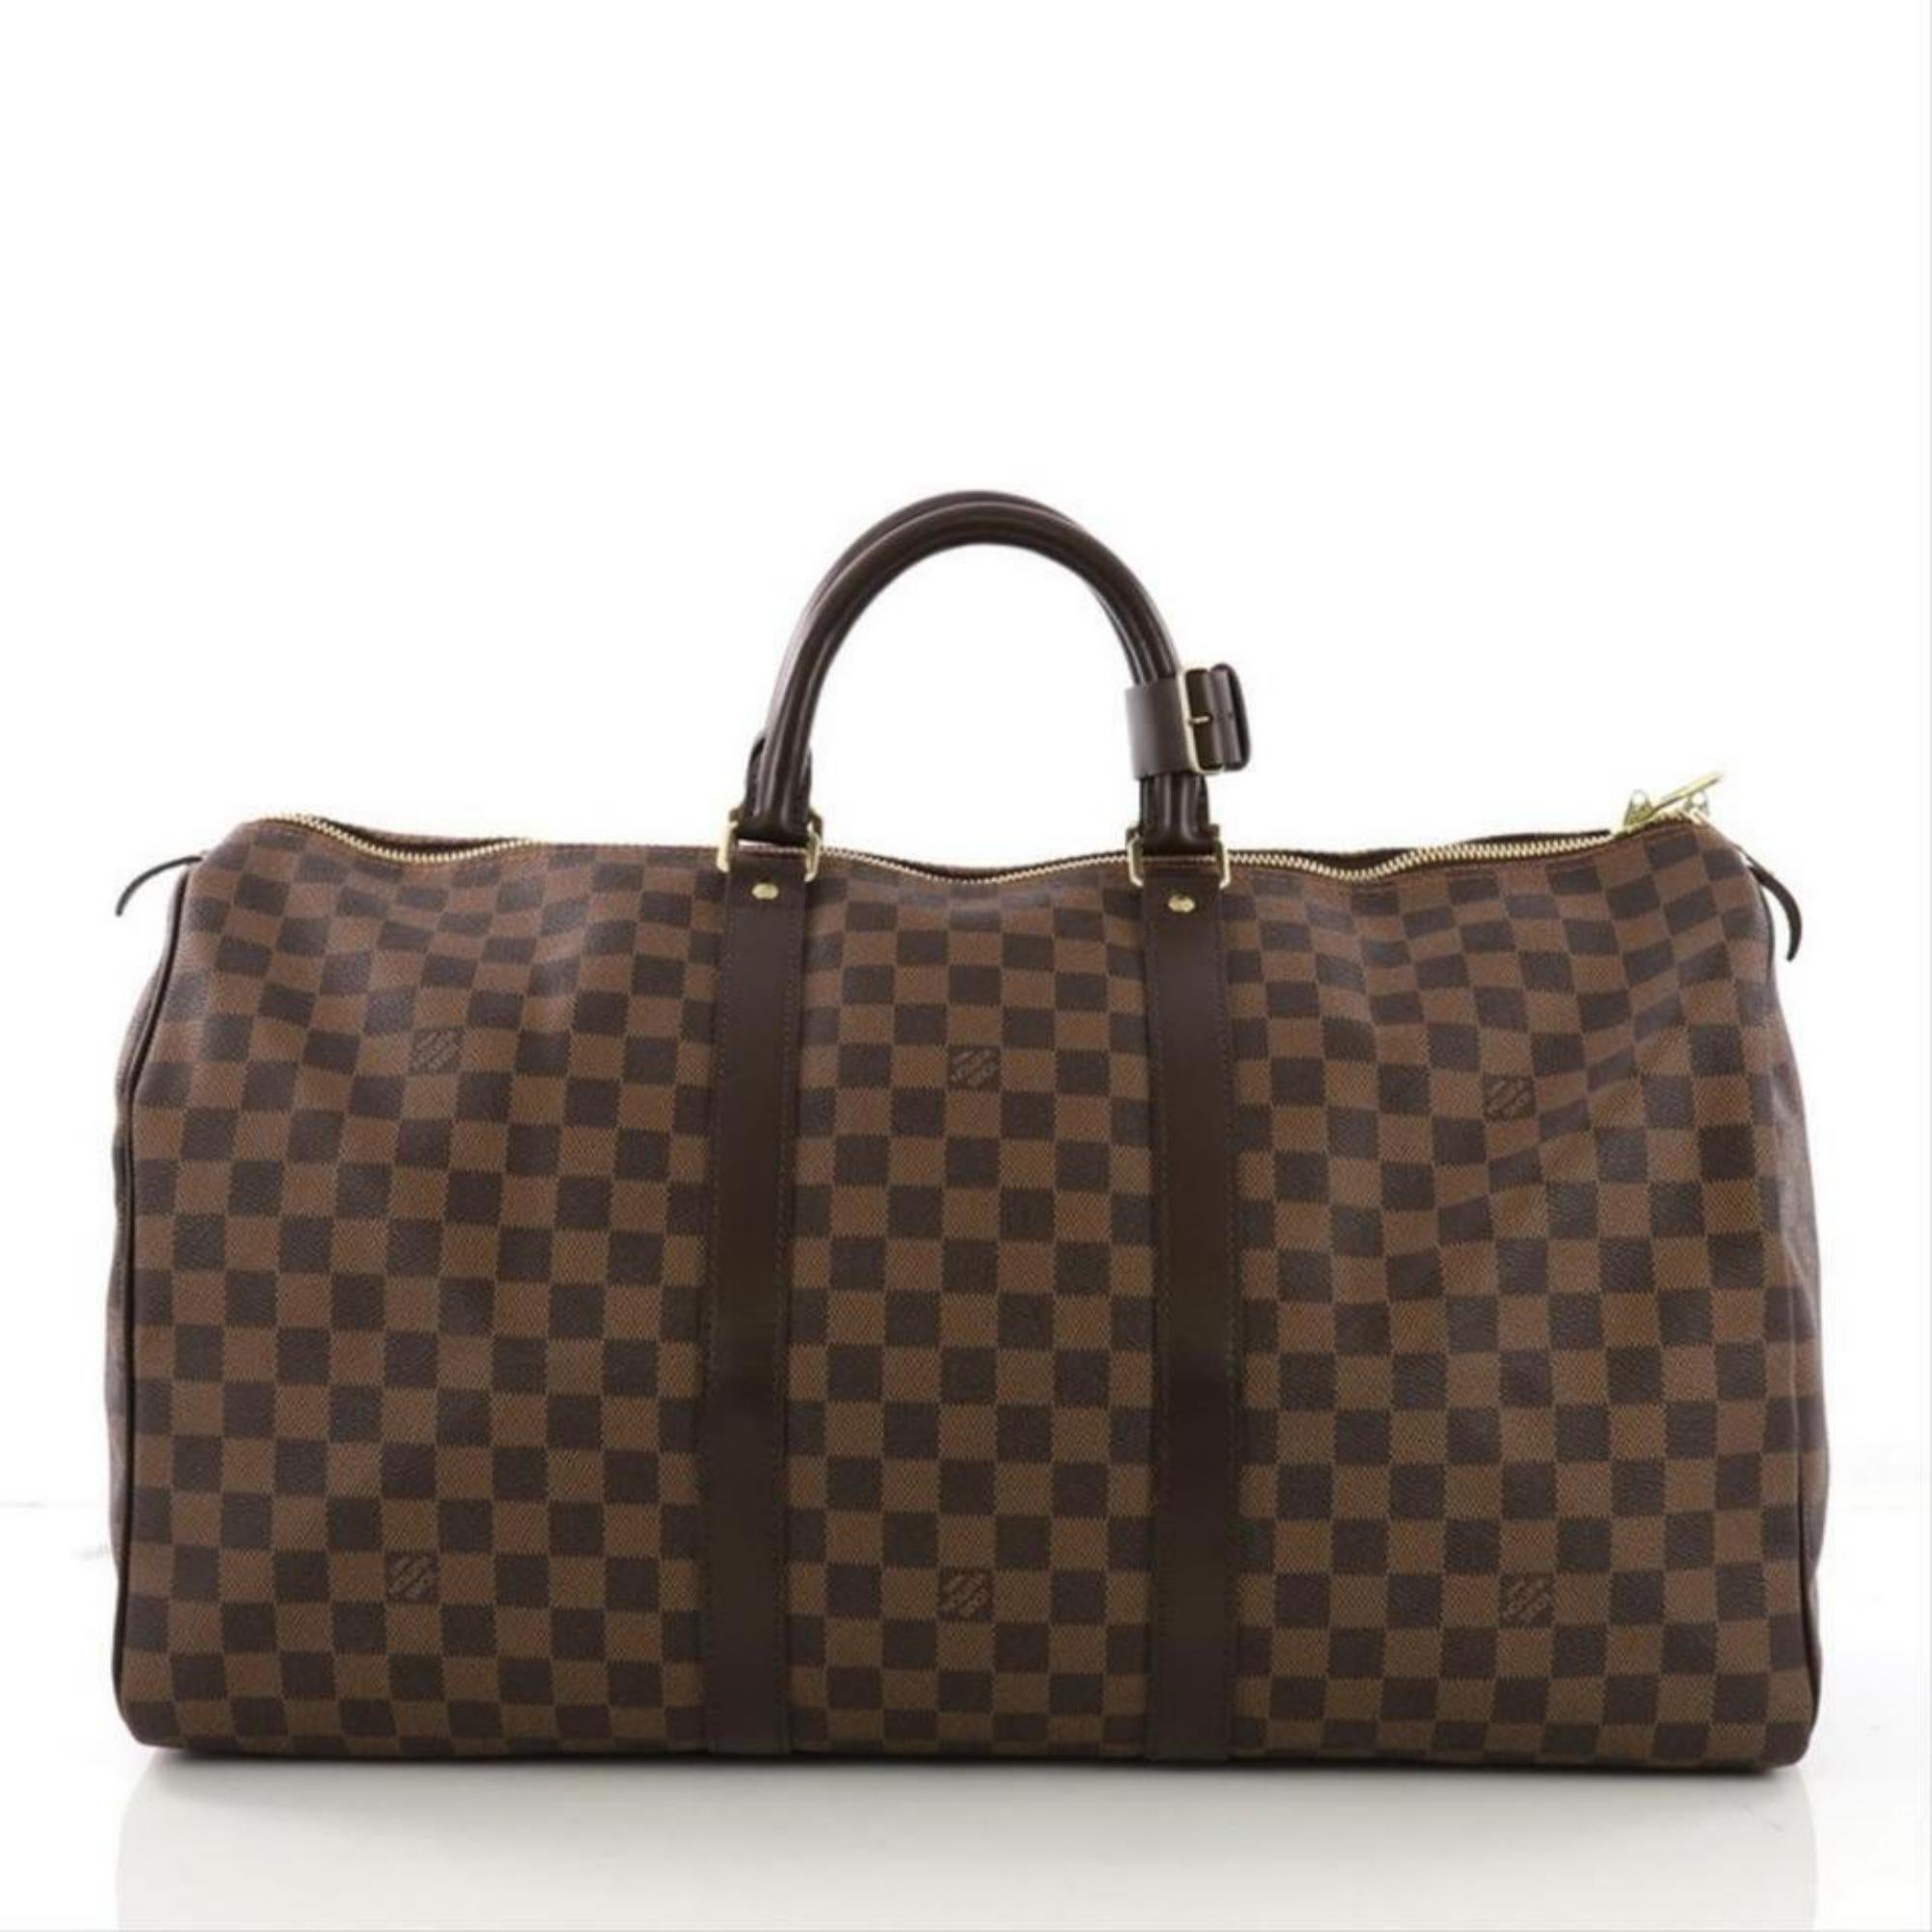 Women's Louis Vuitton Keepall Duffle  50 870229 Brown Coated Canvas Weekend/Travel Bag For Sale